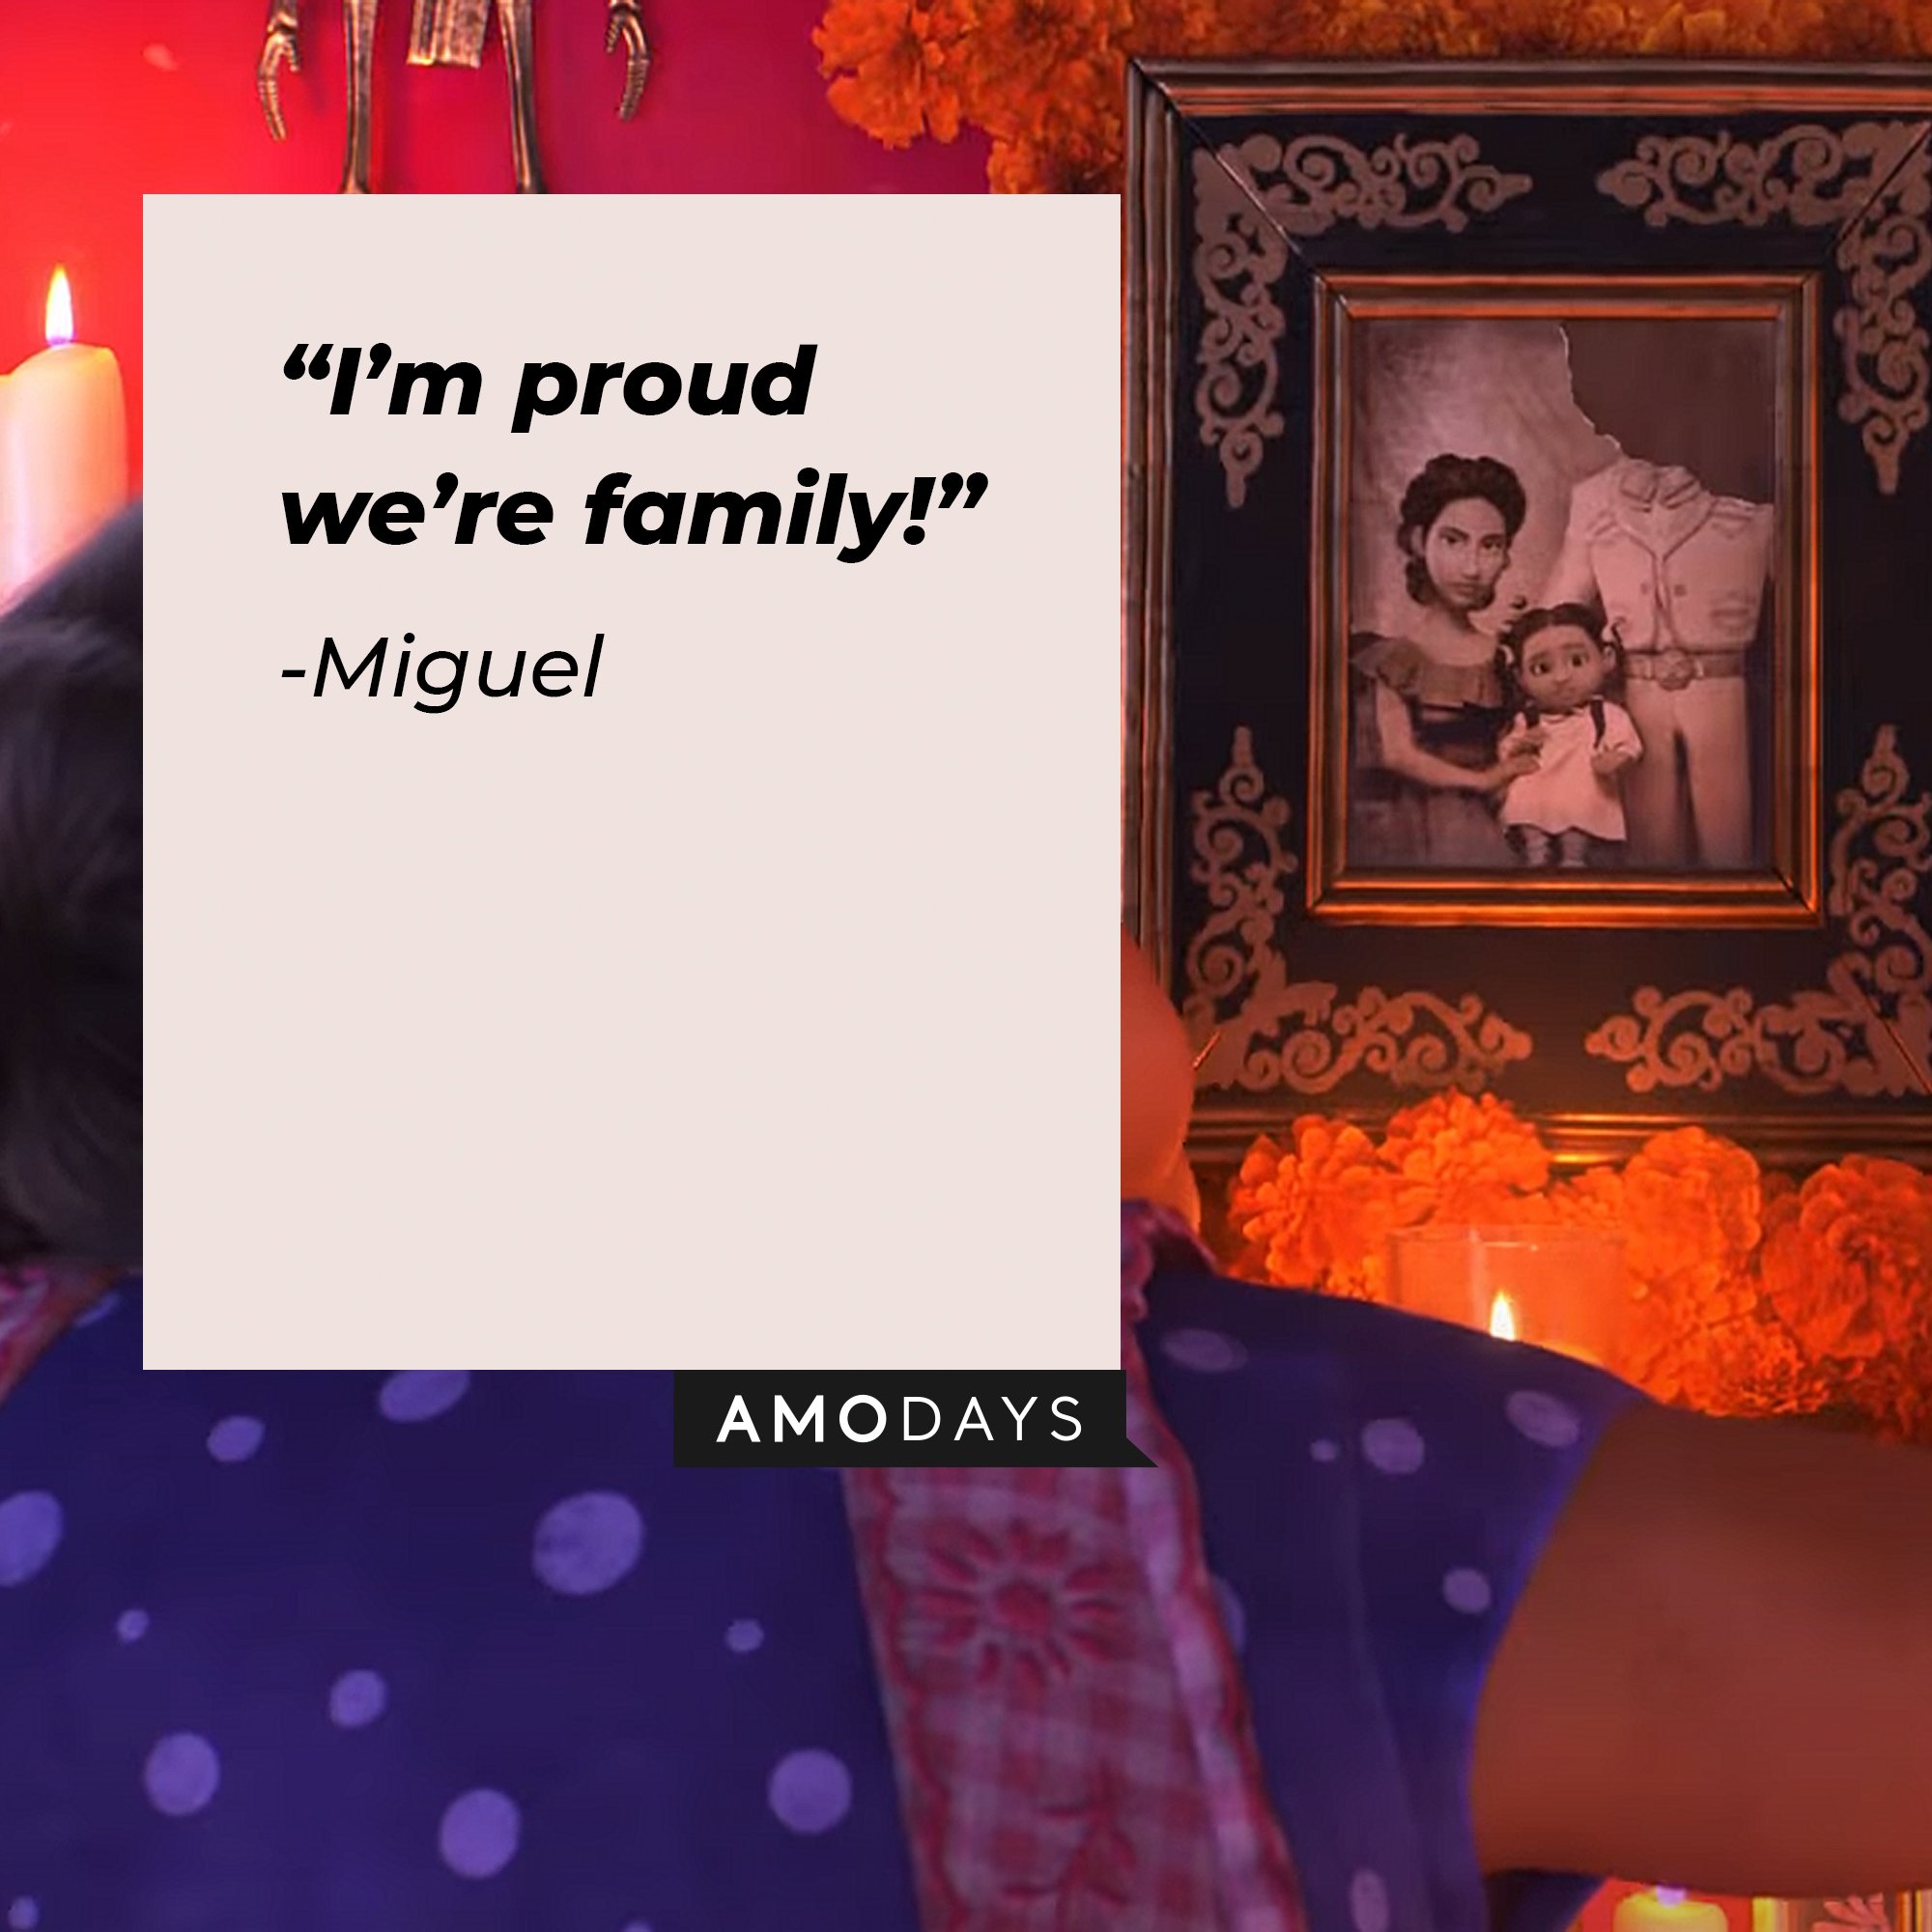 Miguel's quote: “I’m proud we’re family!”  | Image: AmoDays